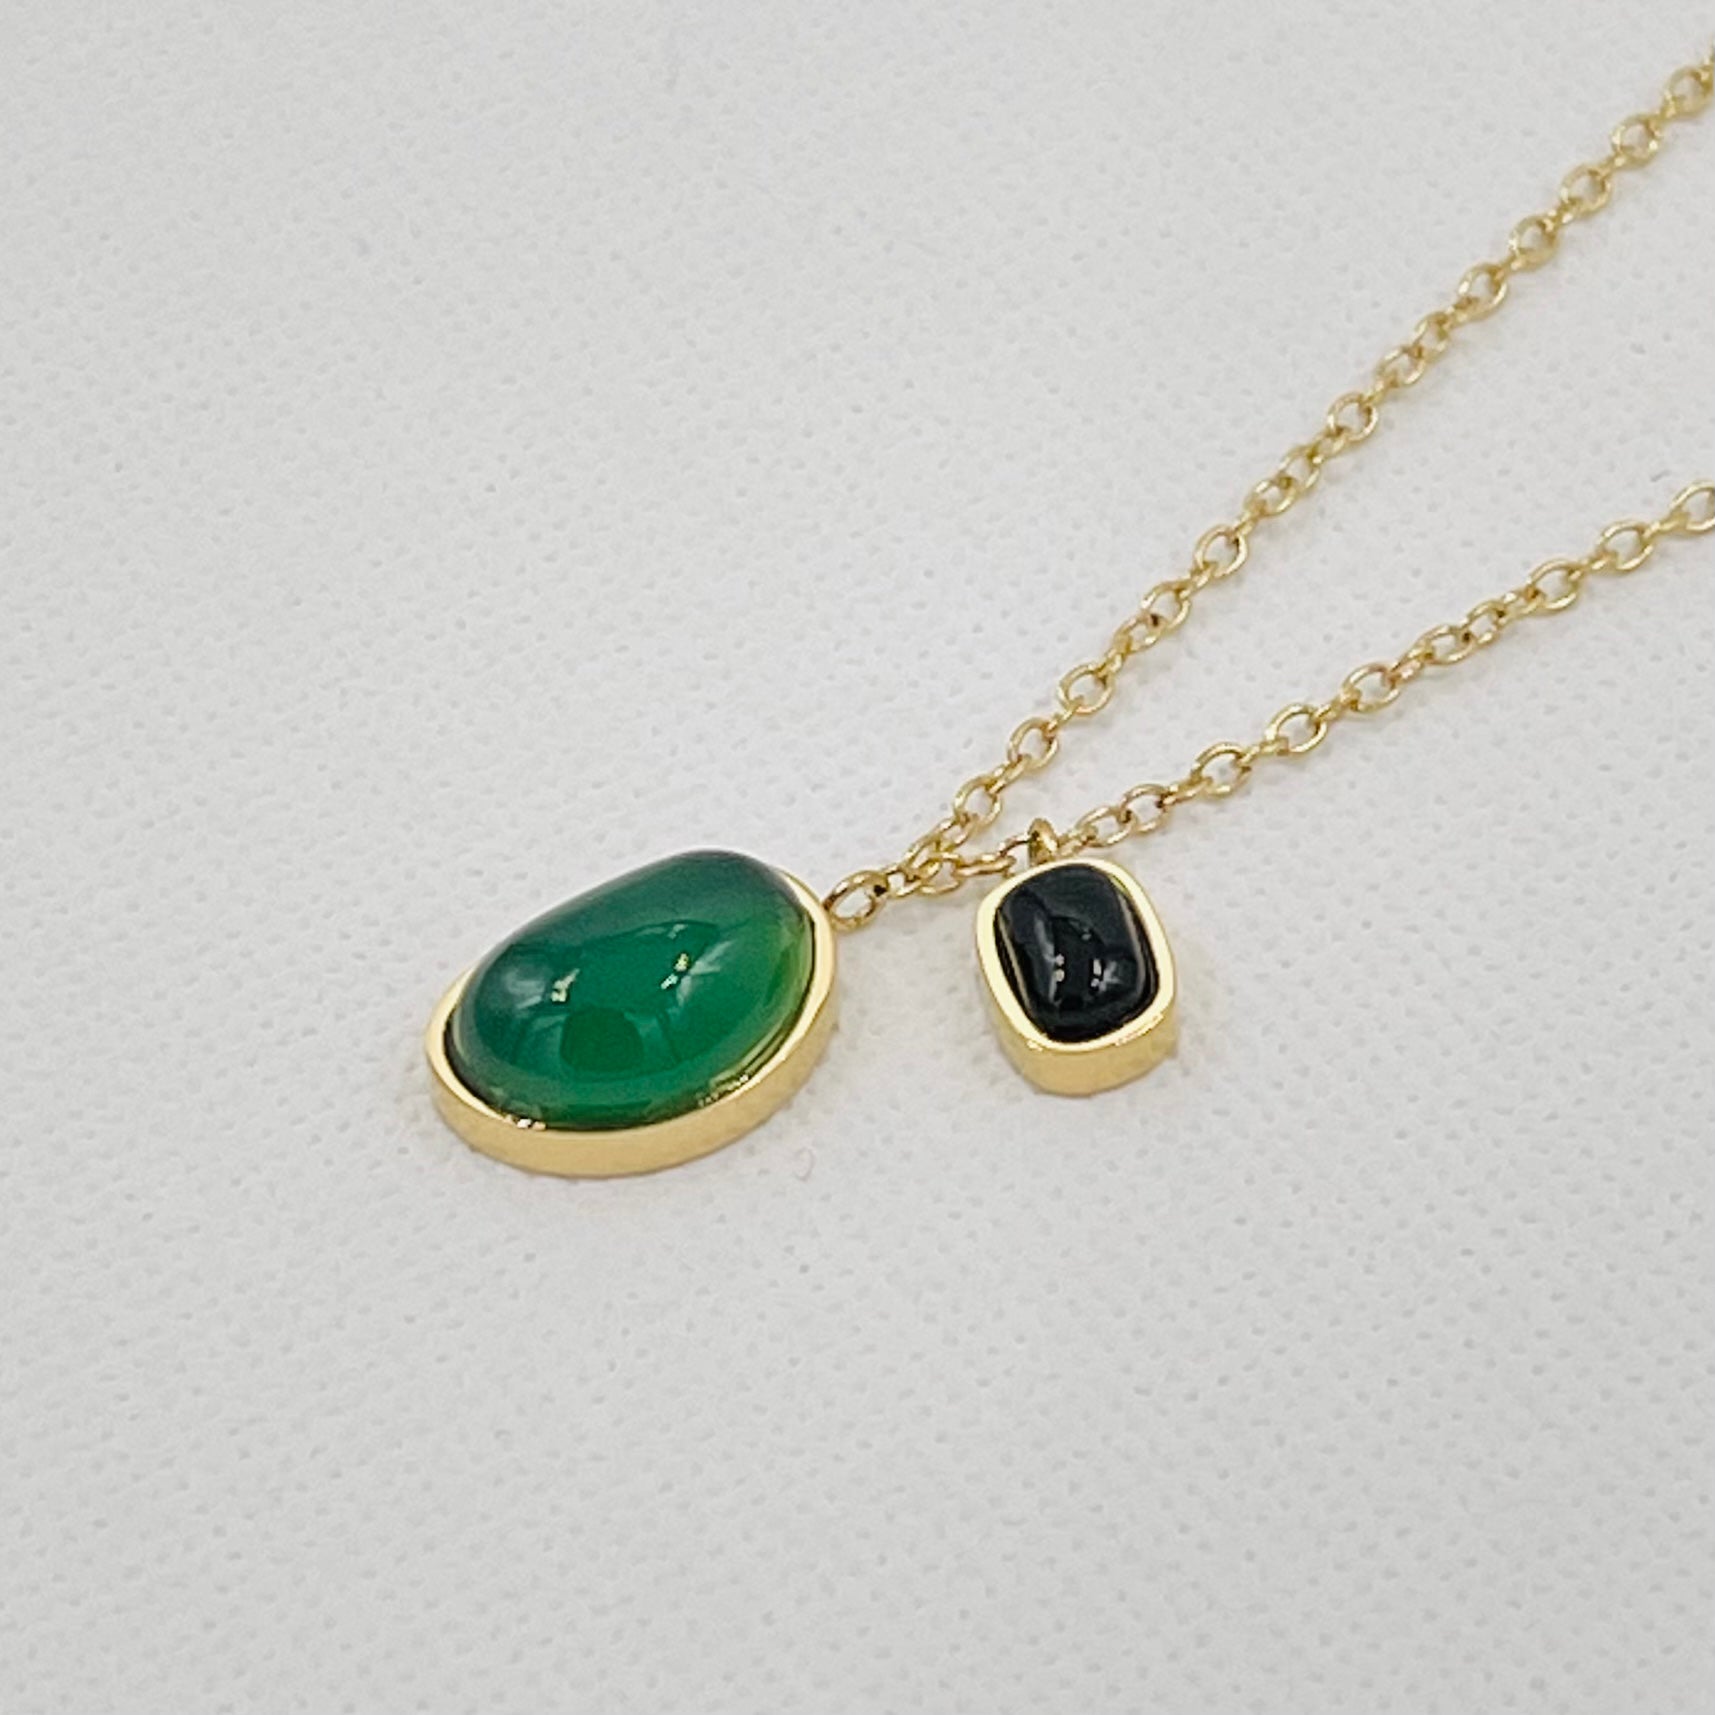 Jade and Black Onyx Necklace